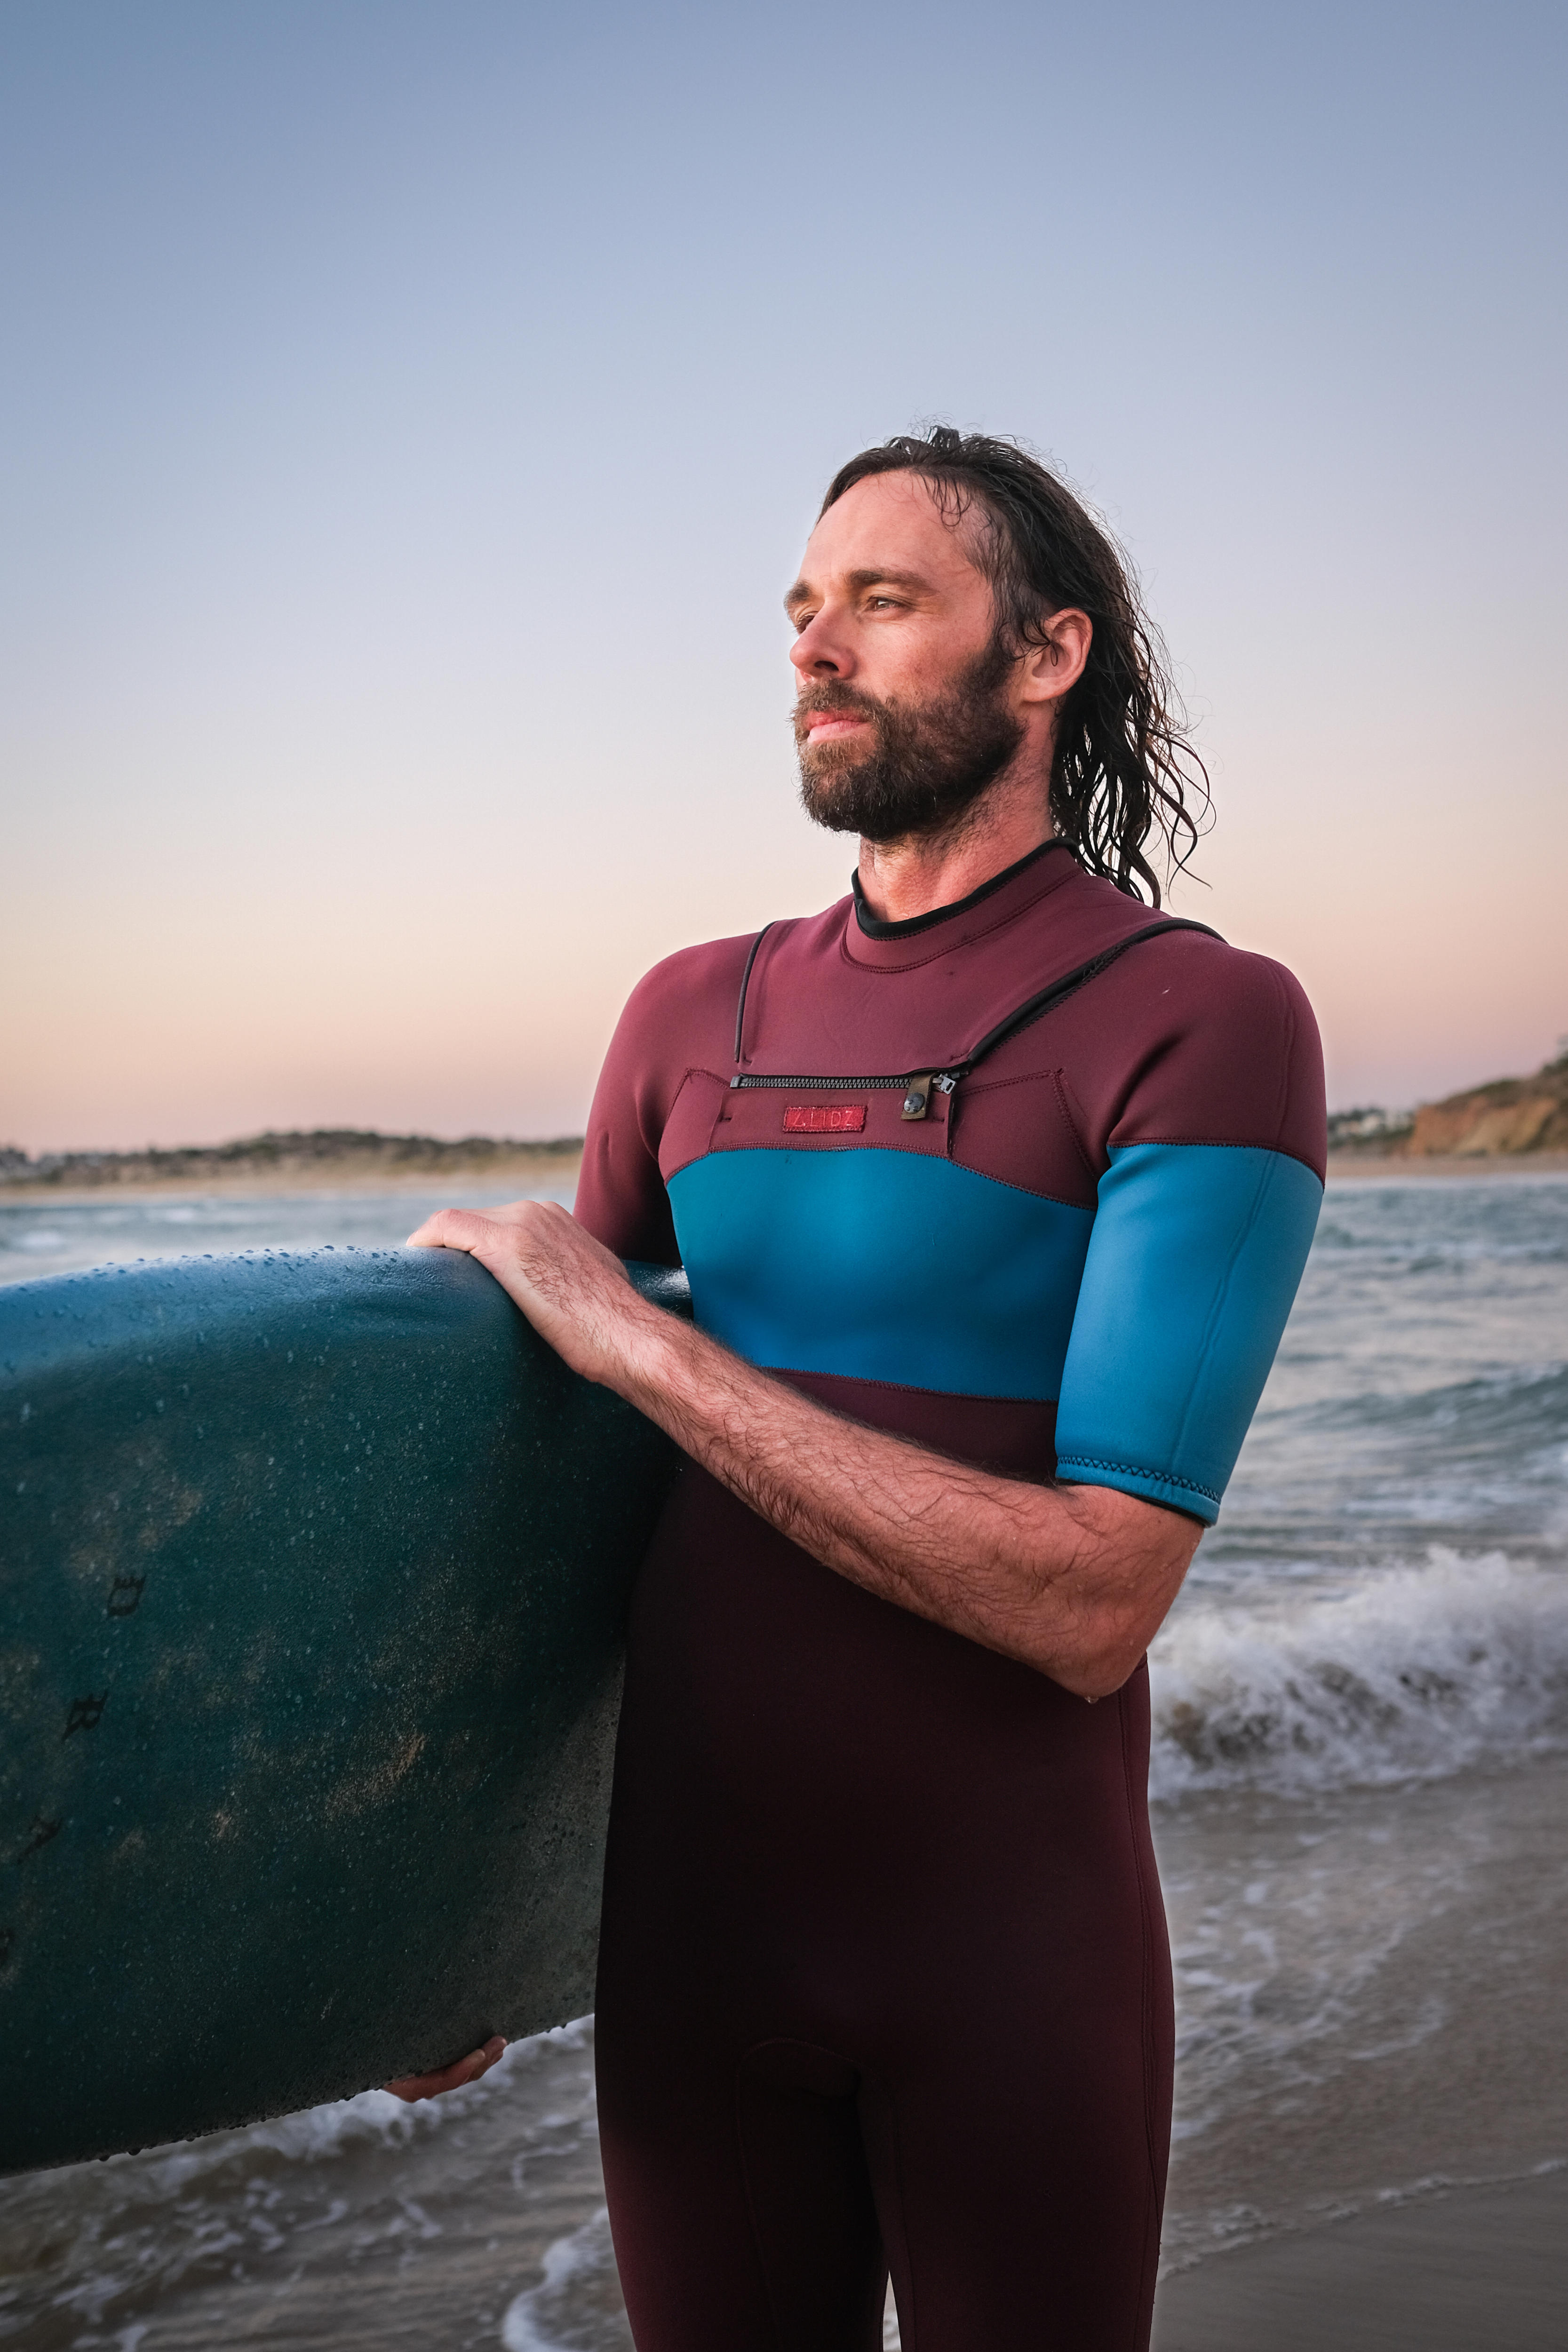 Henry Jock Walker stands next to the ocean after a surf, hair wet and wearing his wetsuit before sunset